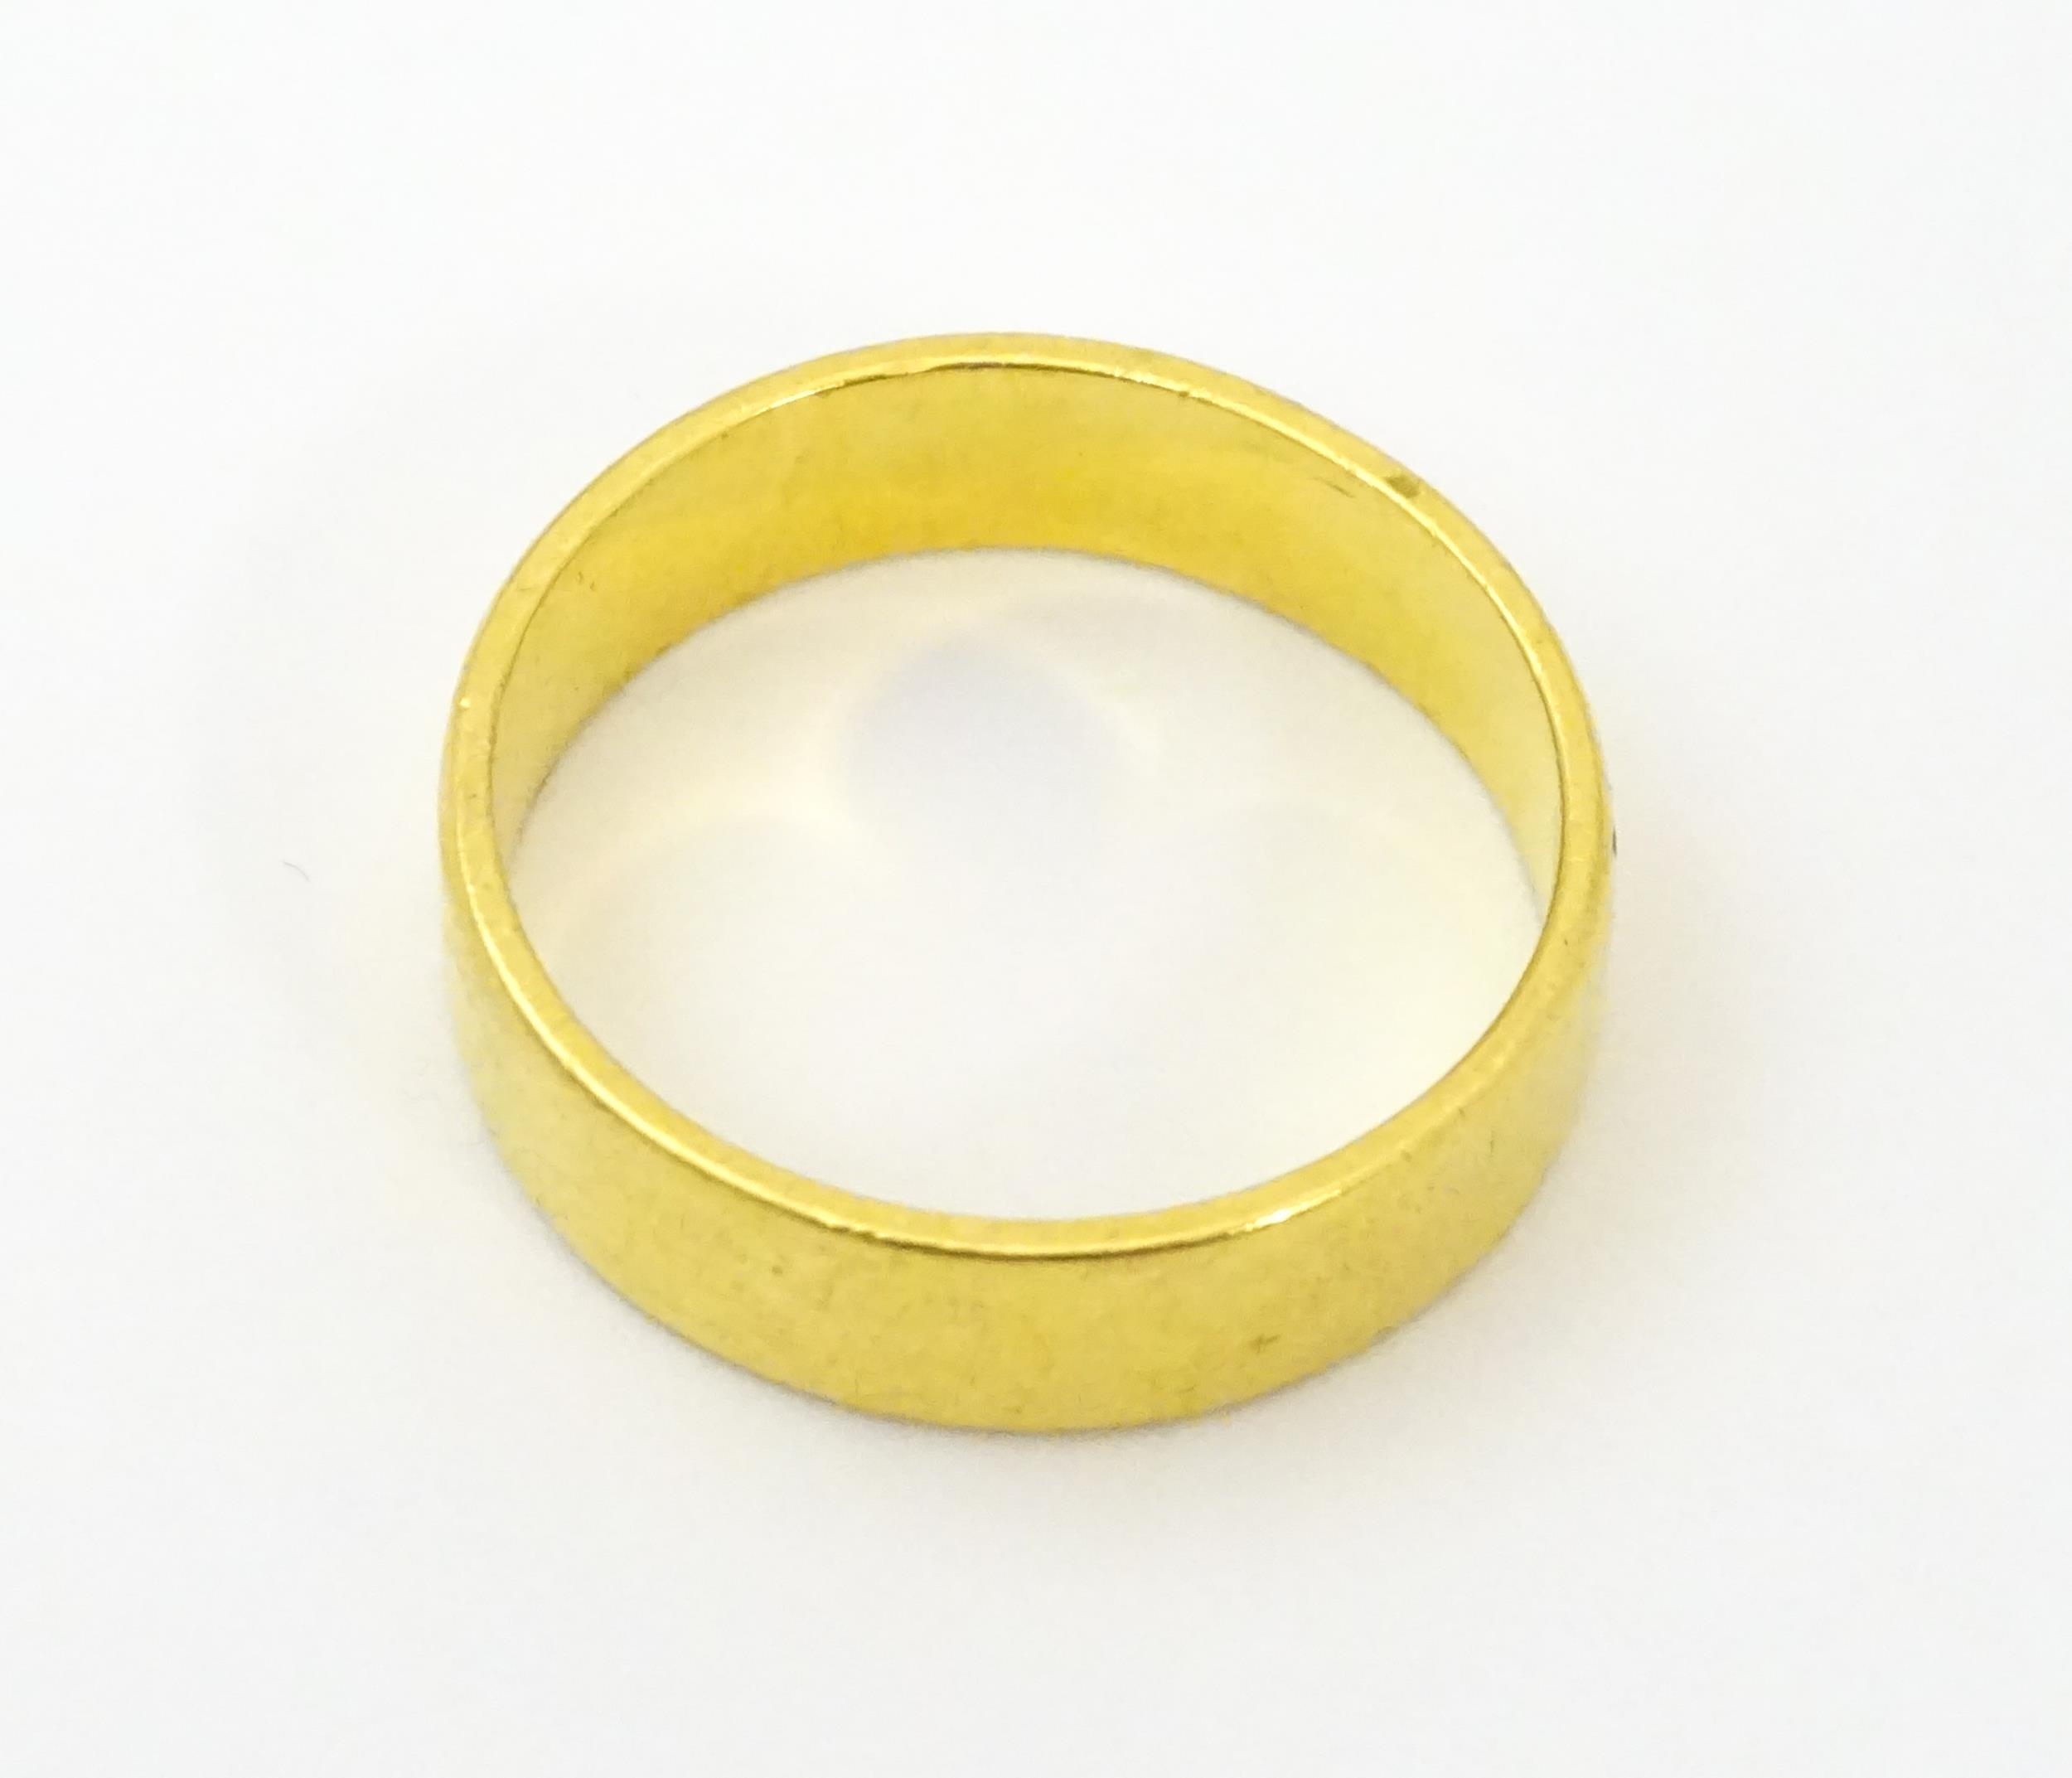 A 22ct gold ring / wedding band. Ring size approx. M 1/2 Please Note - we do not make reference to - Image 5 of 6